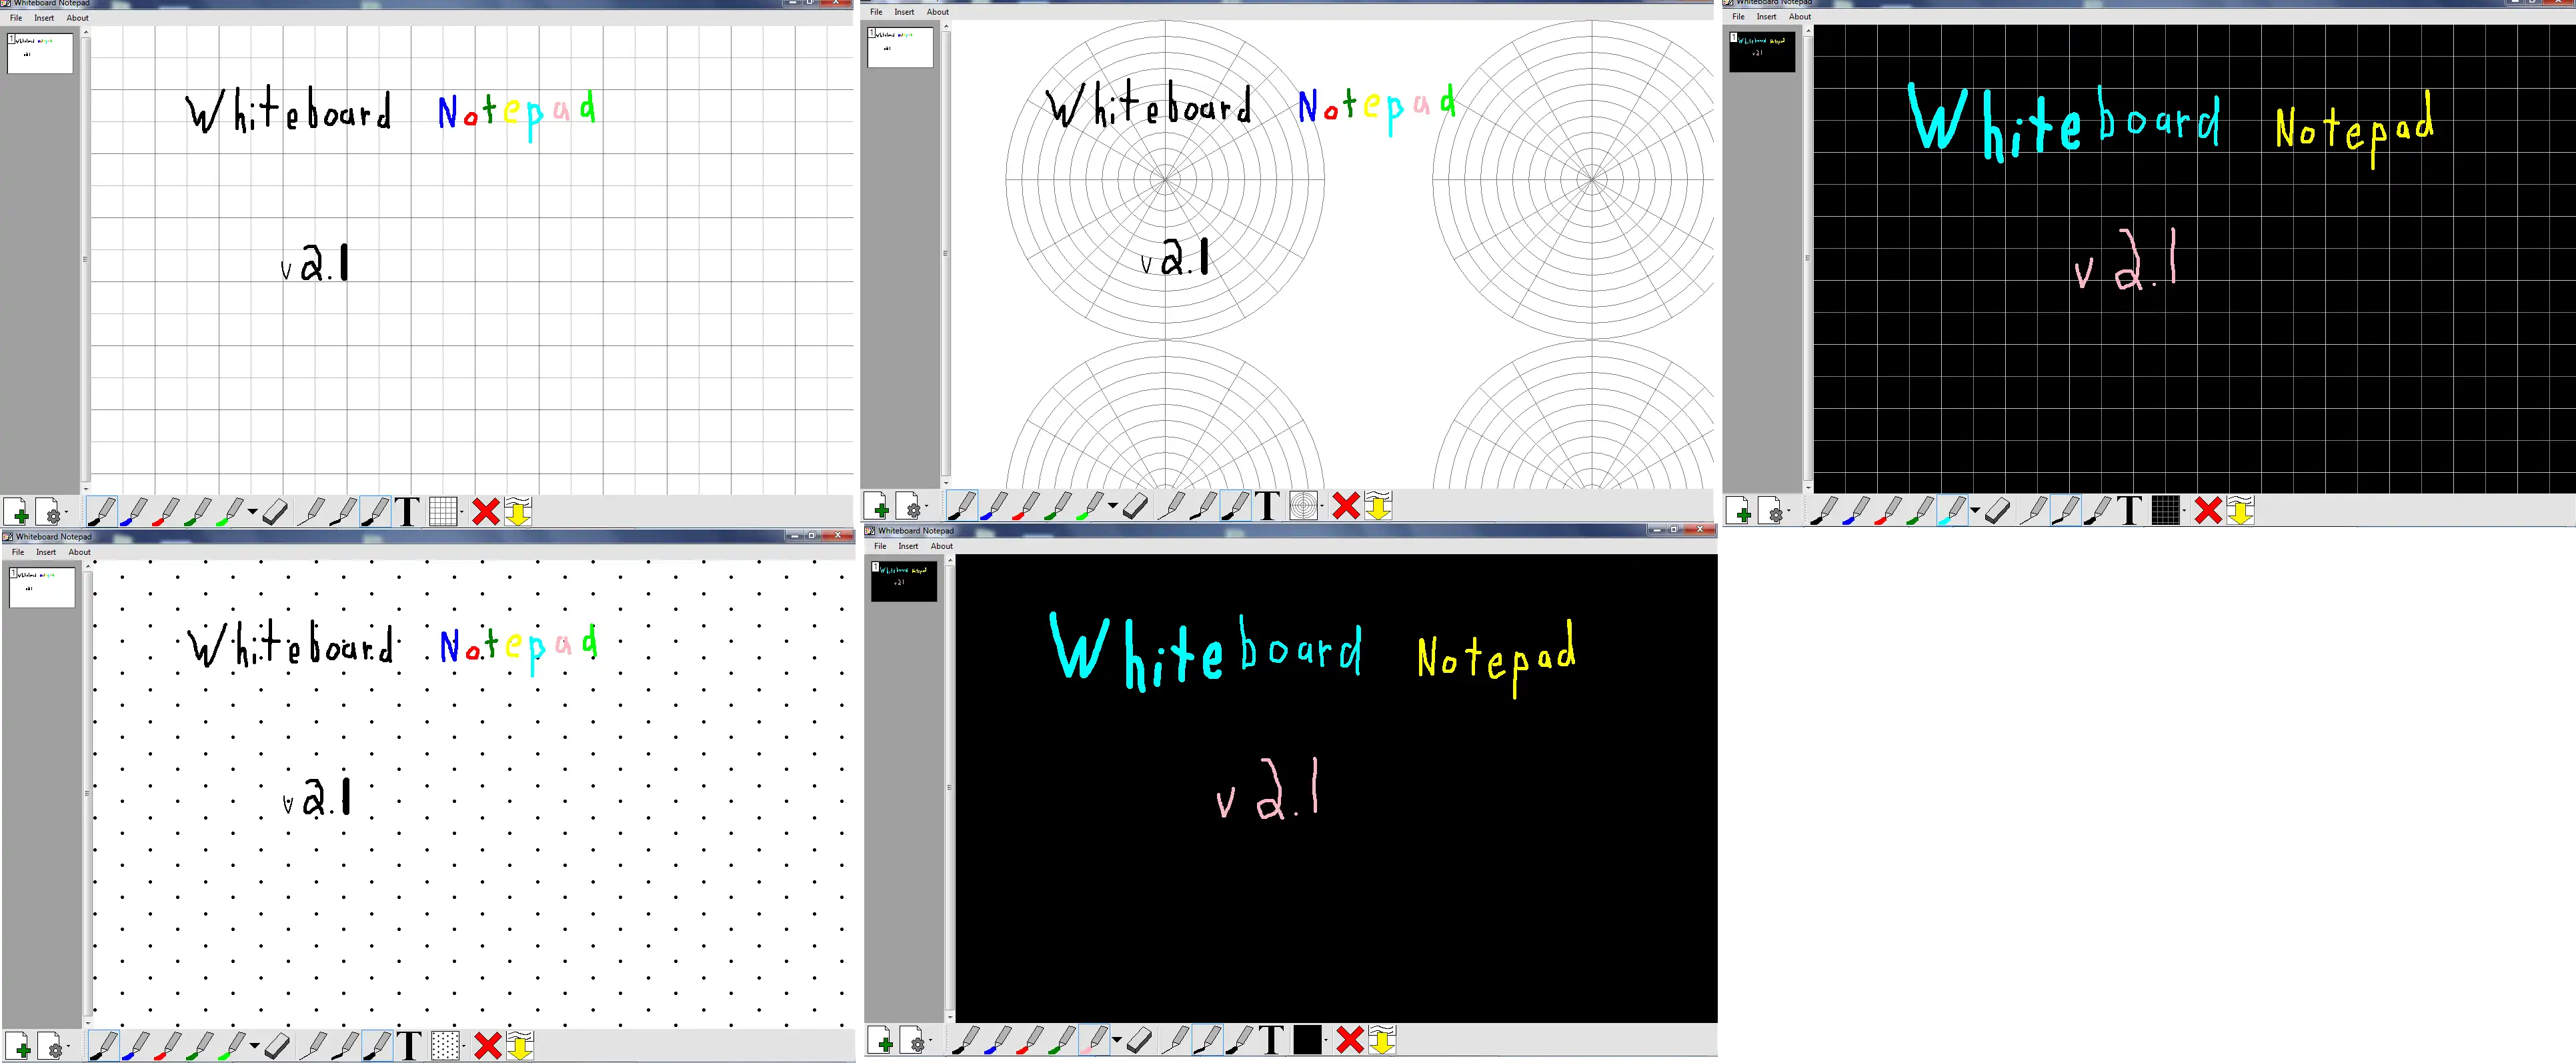 Download web tool or web app Whiteboard Notepad